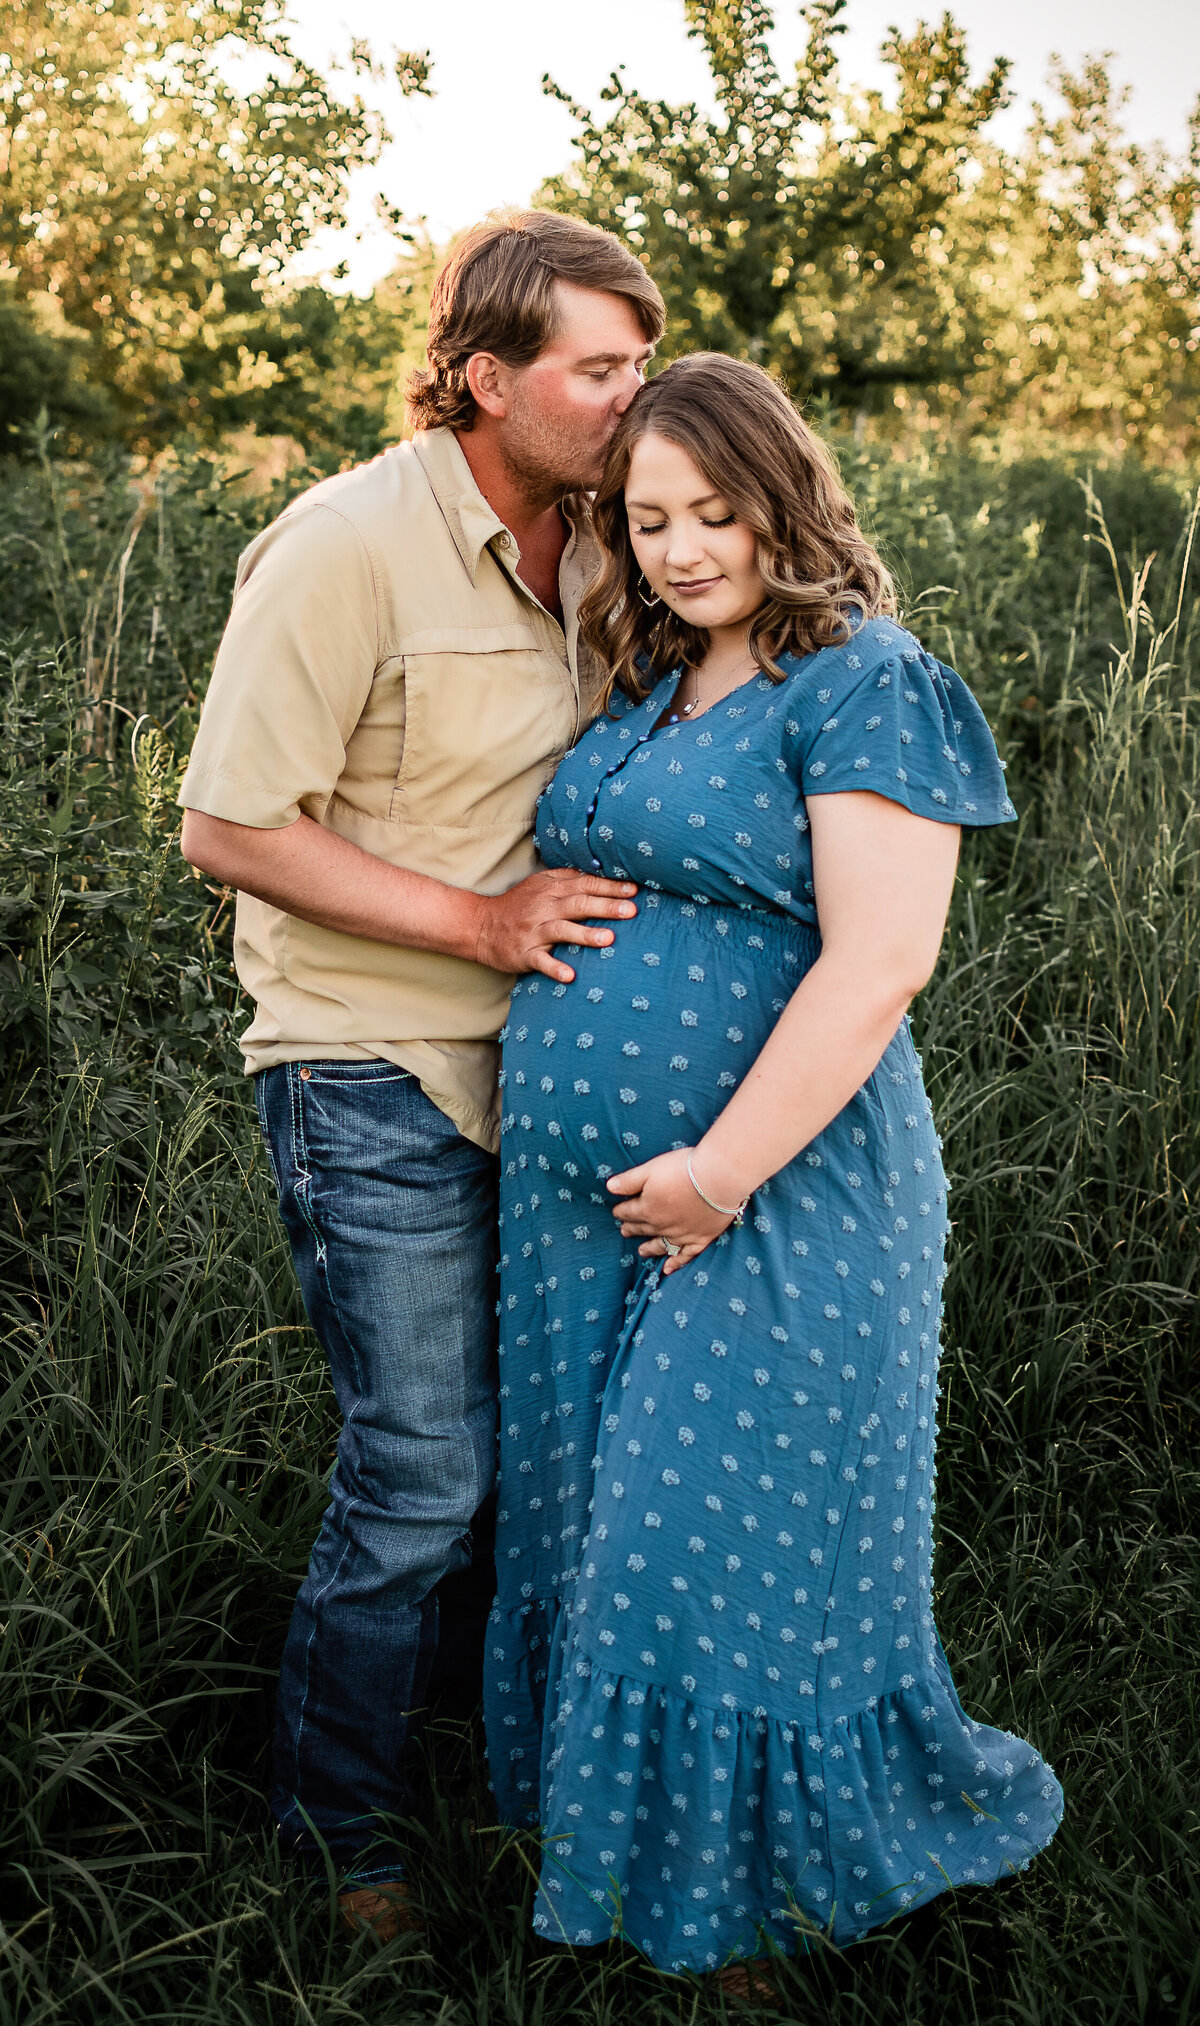 A dad to be kisses his expectant wife's head as she cradles her belly bump.